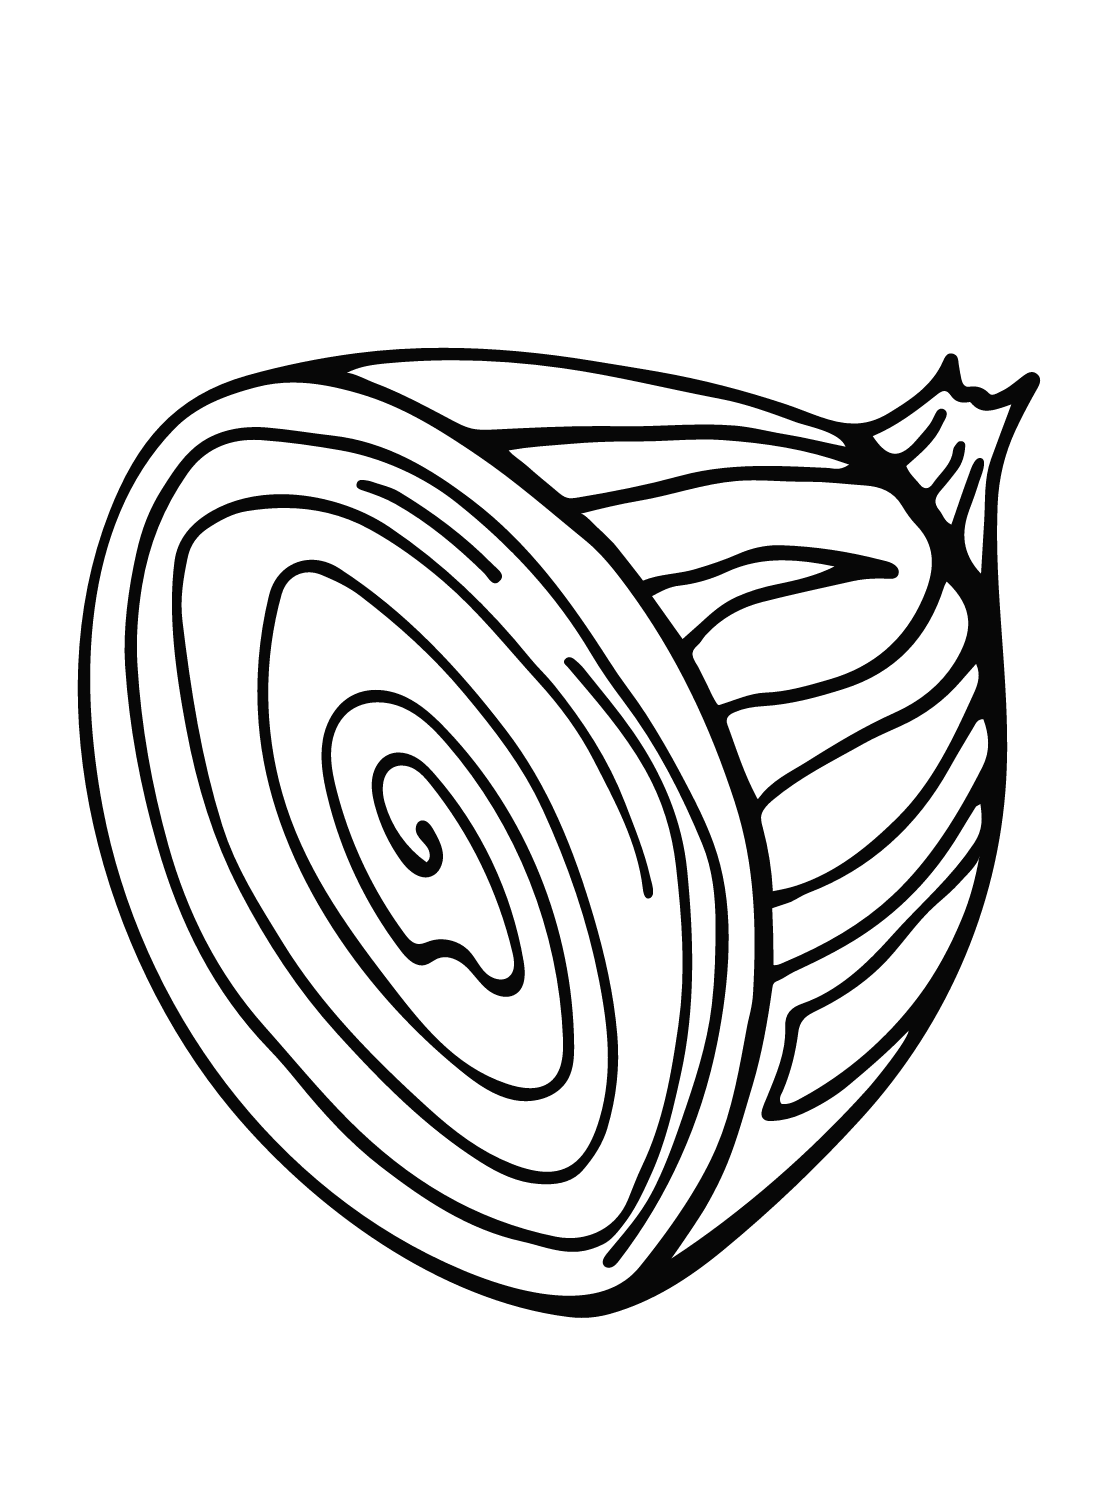 Half an Onion Coloring Page